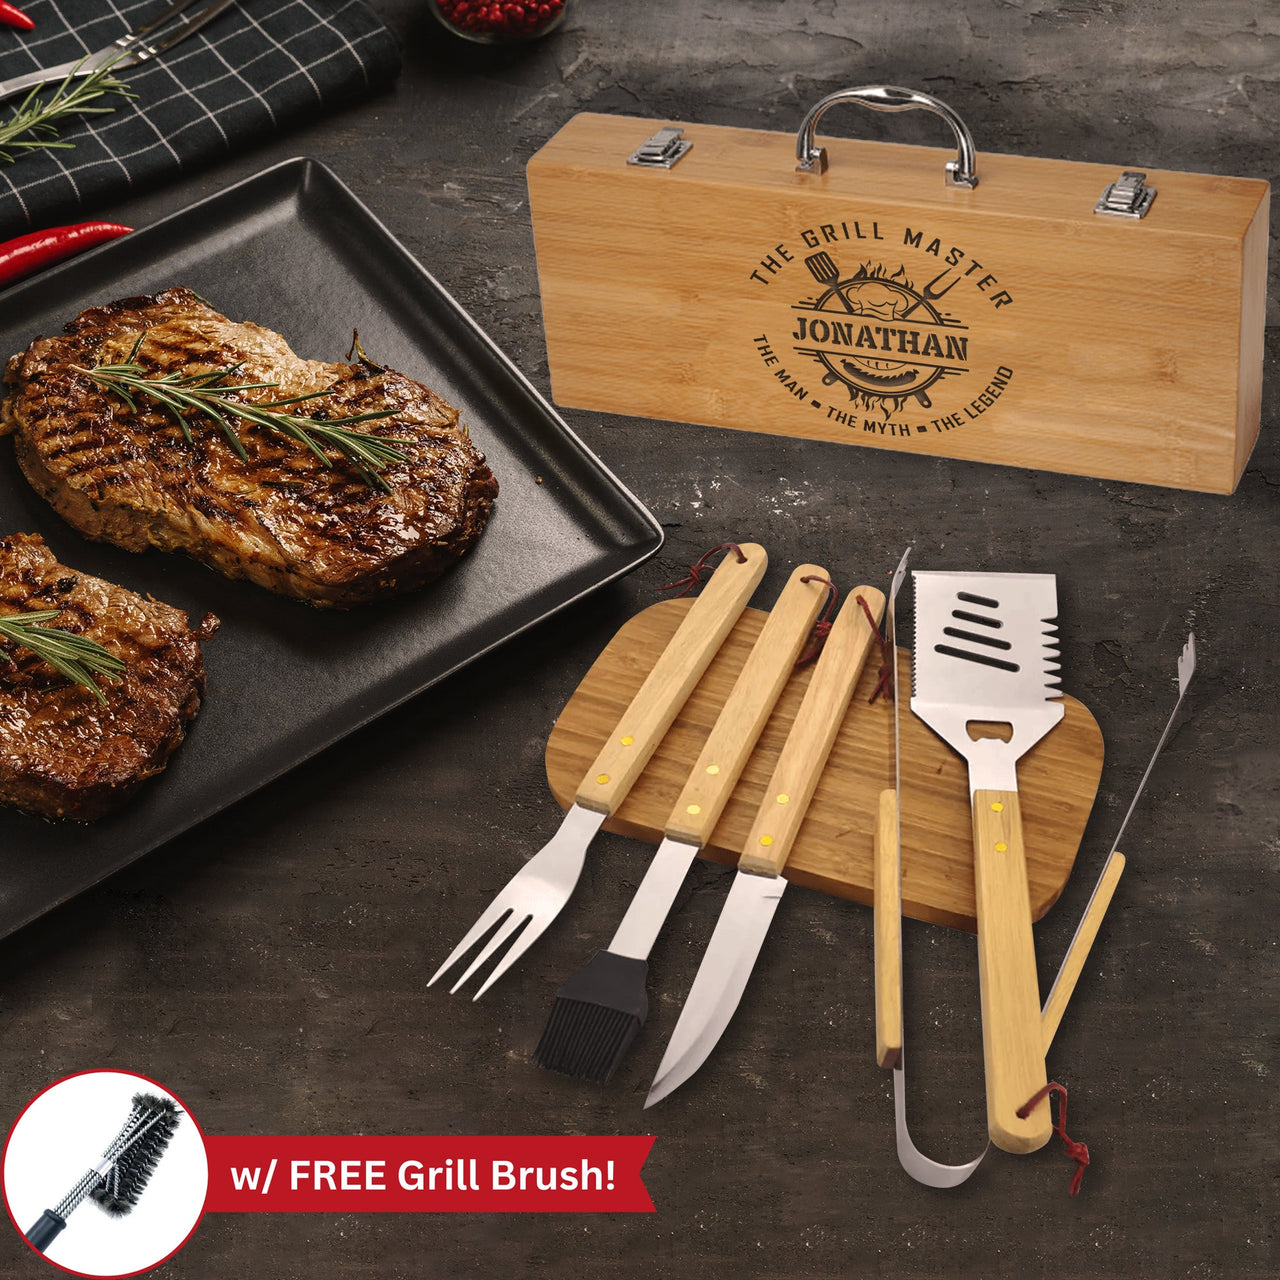 BBQ Gifts, Personalized Grilling Platter, Grill Master, Grill